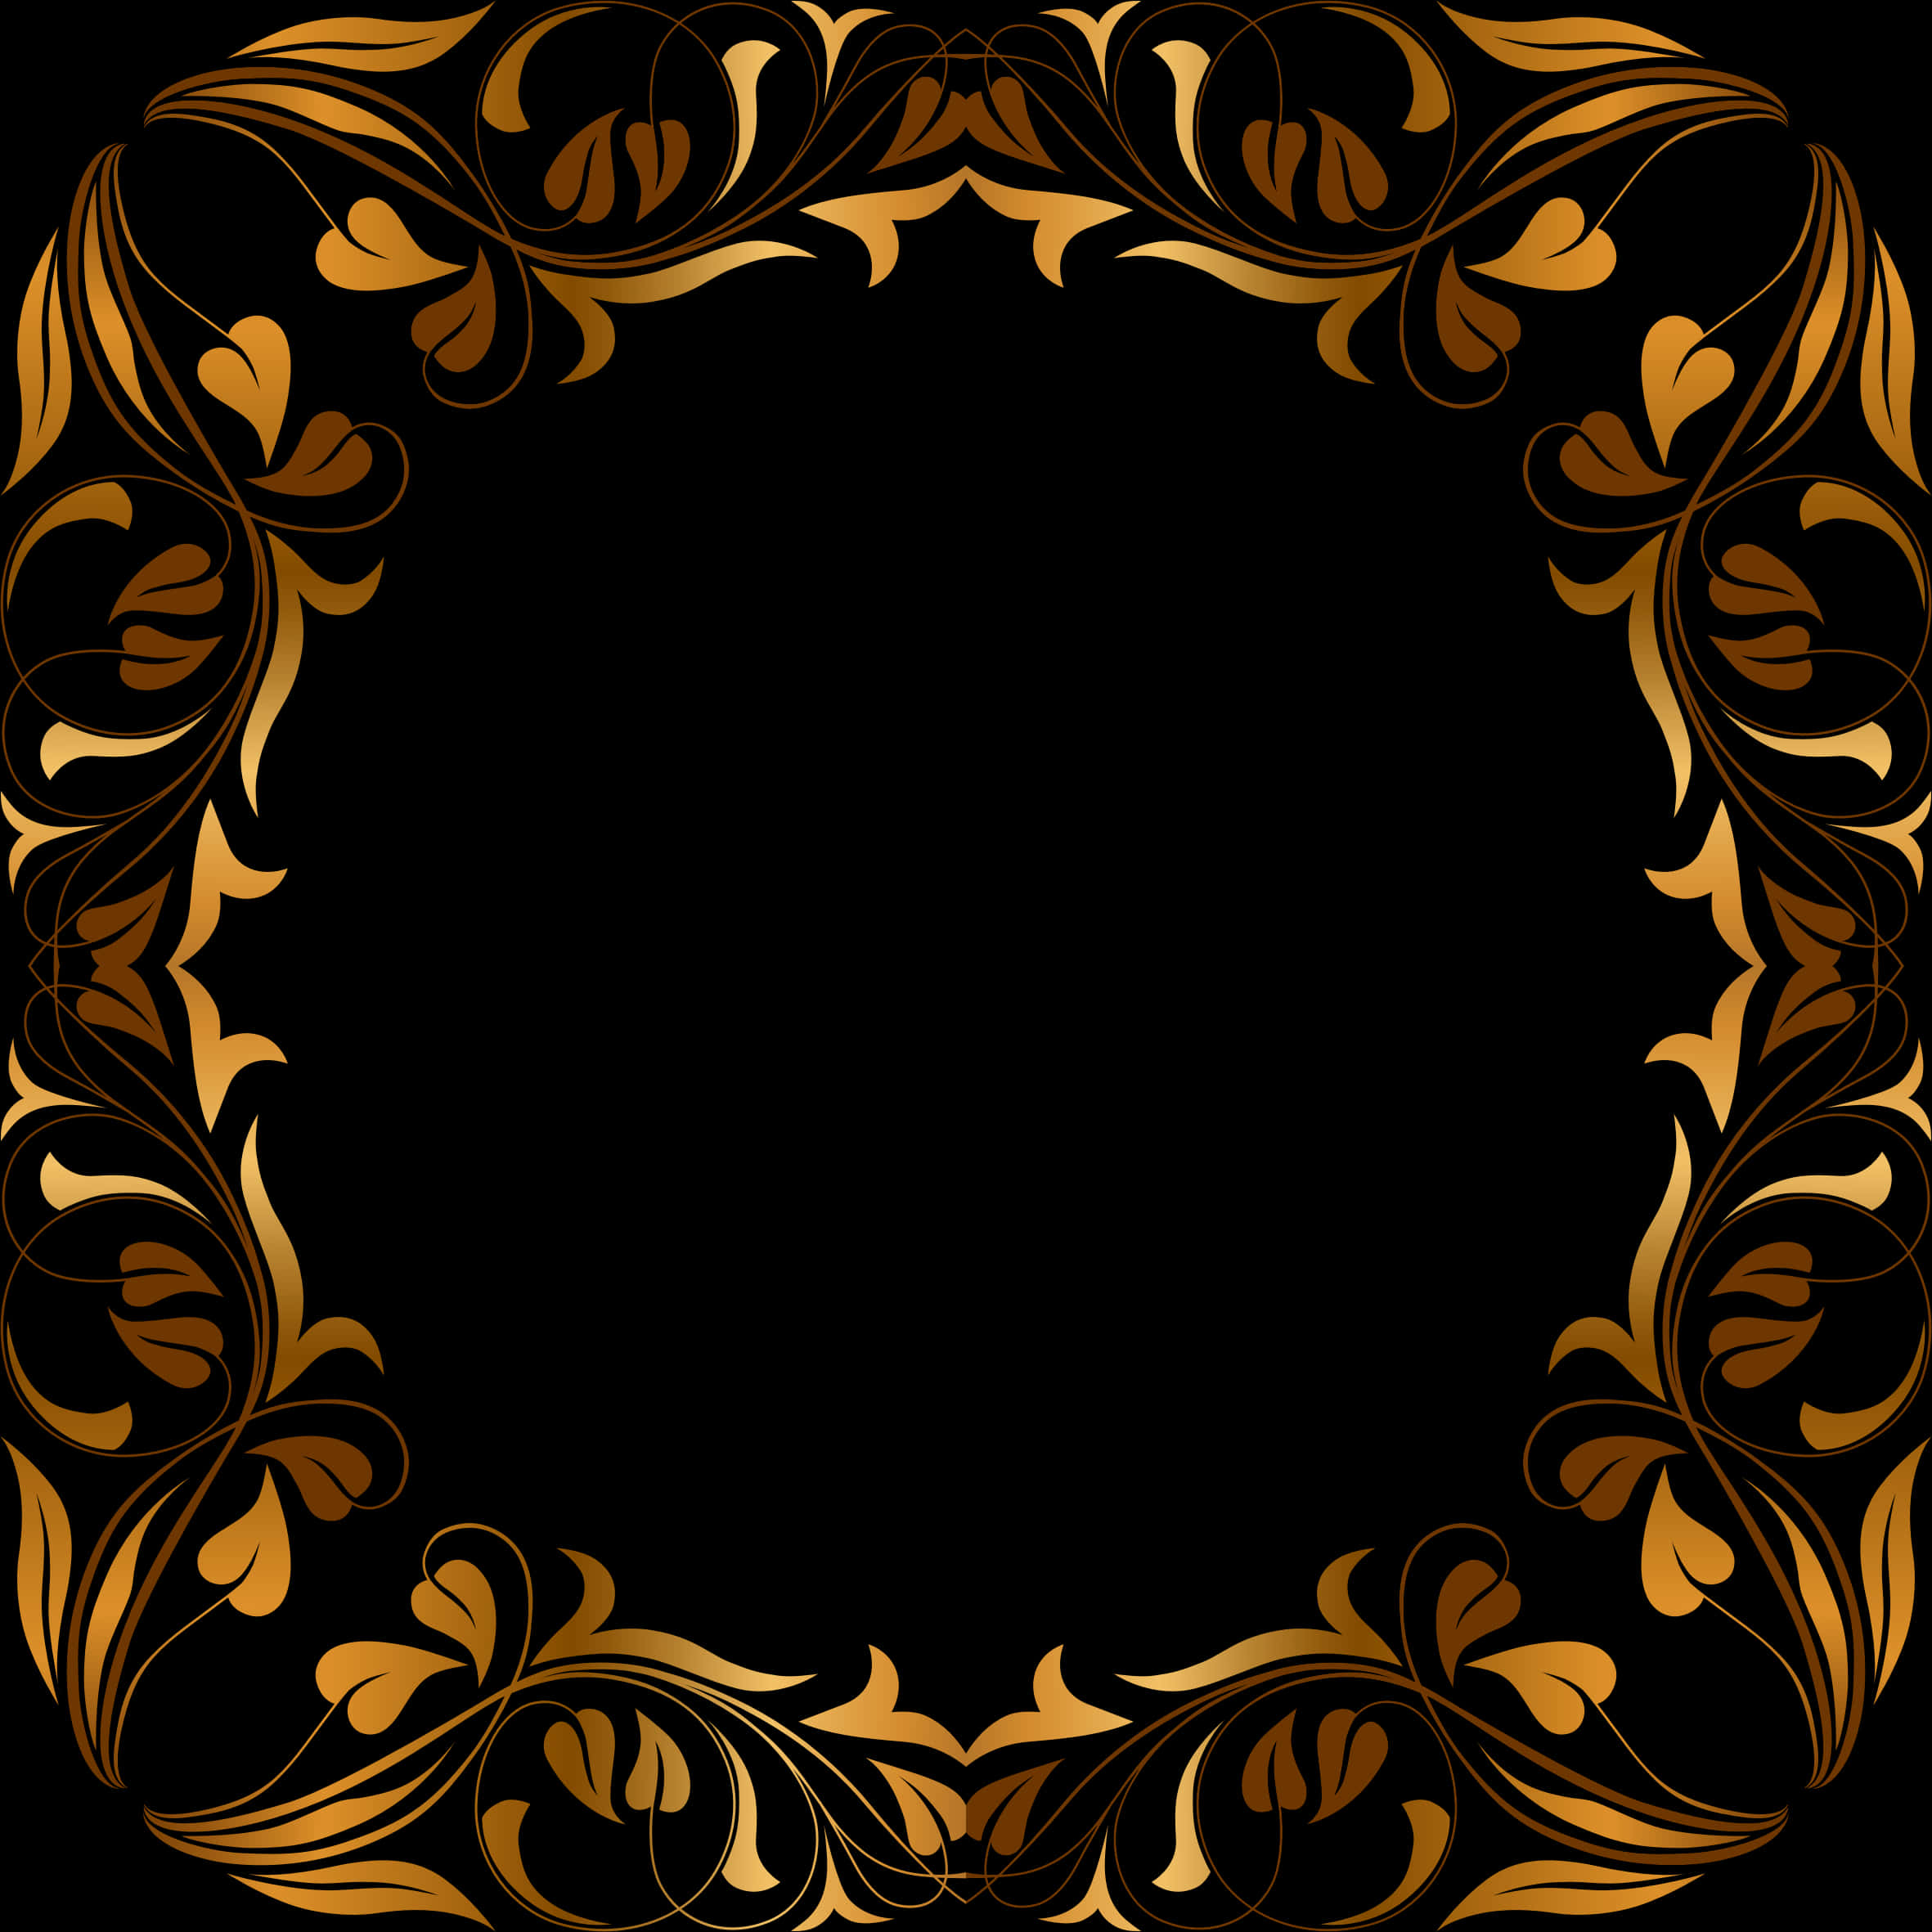 A Gold And Black Floral Frame